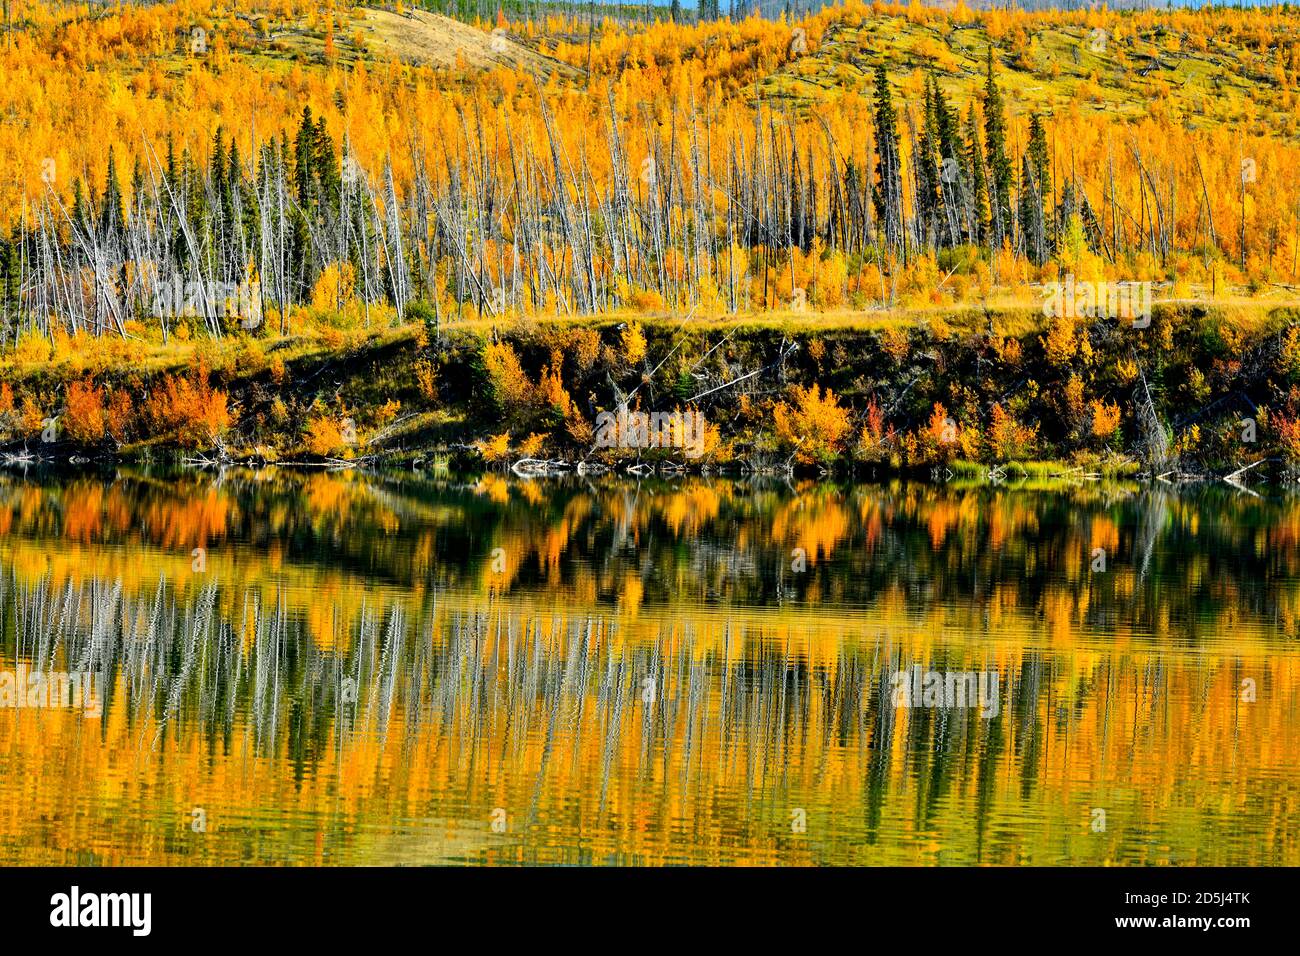 A beautiful fall scene of the colorful foliage along the shore on Sincline Ridge reflecting in the waters of Talbot lake in Jasper National Park in Al Stock Photo